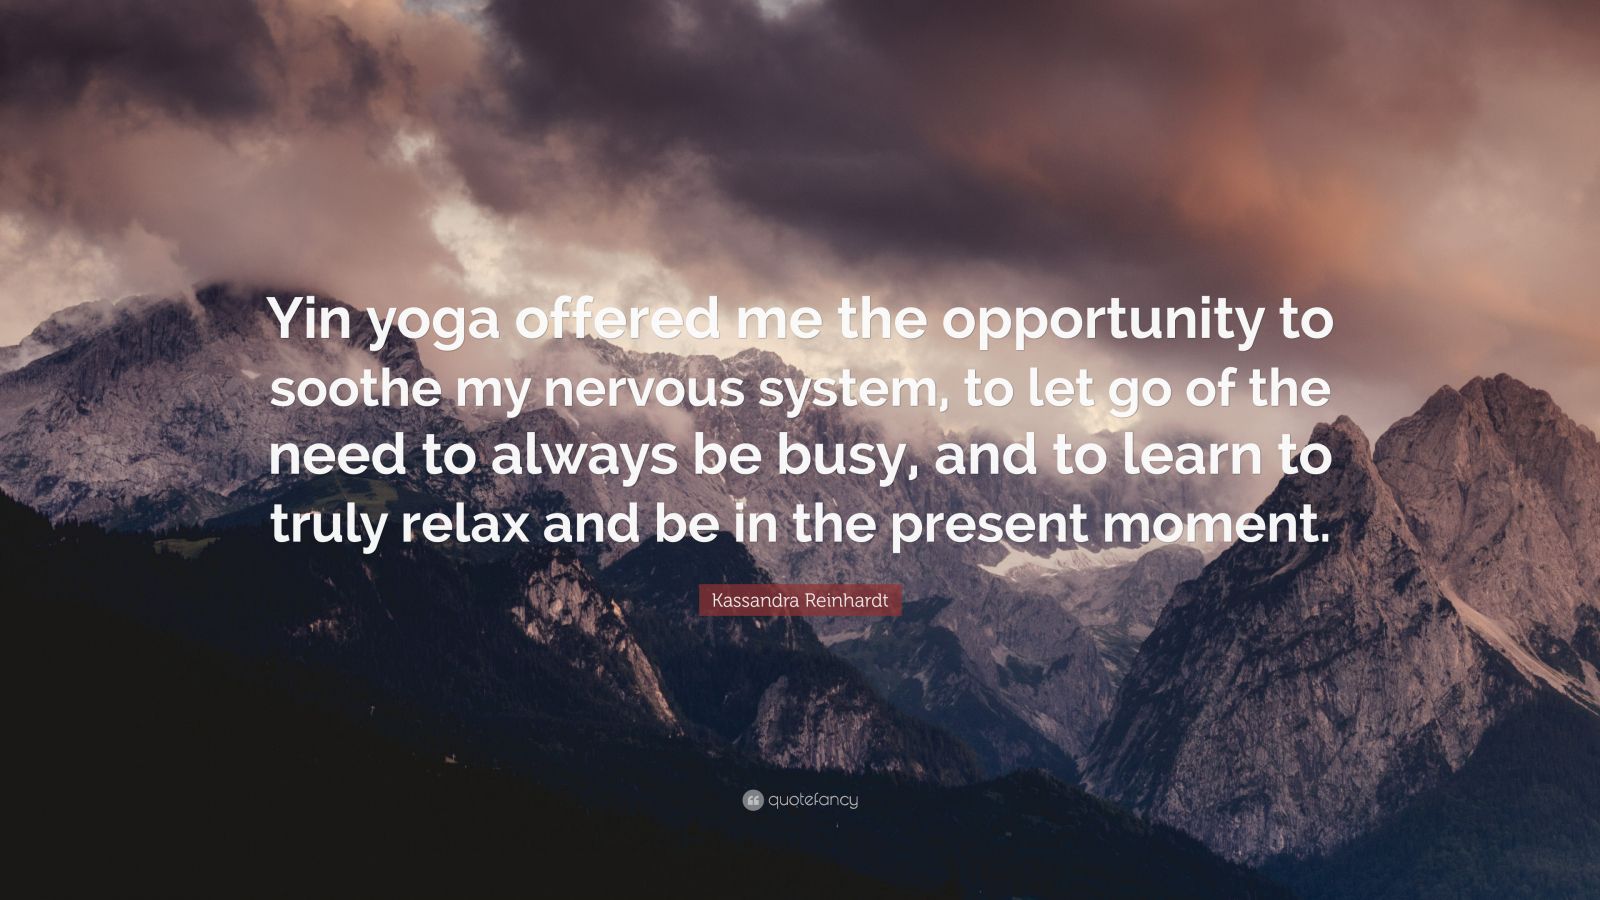 Kassandra Reinhardt Quote: “Yin yoga offered me the opportunity to soothe  my nervous system, to let go of the need to always be busy, and to learn t ”